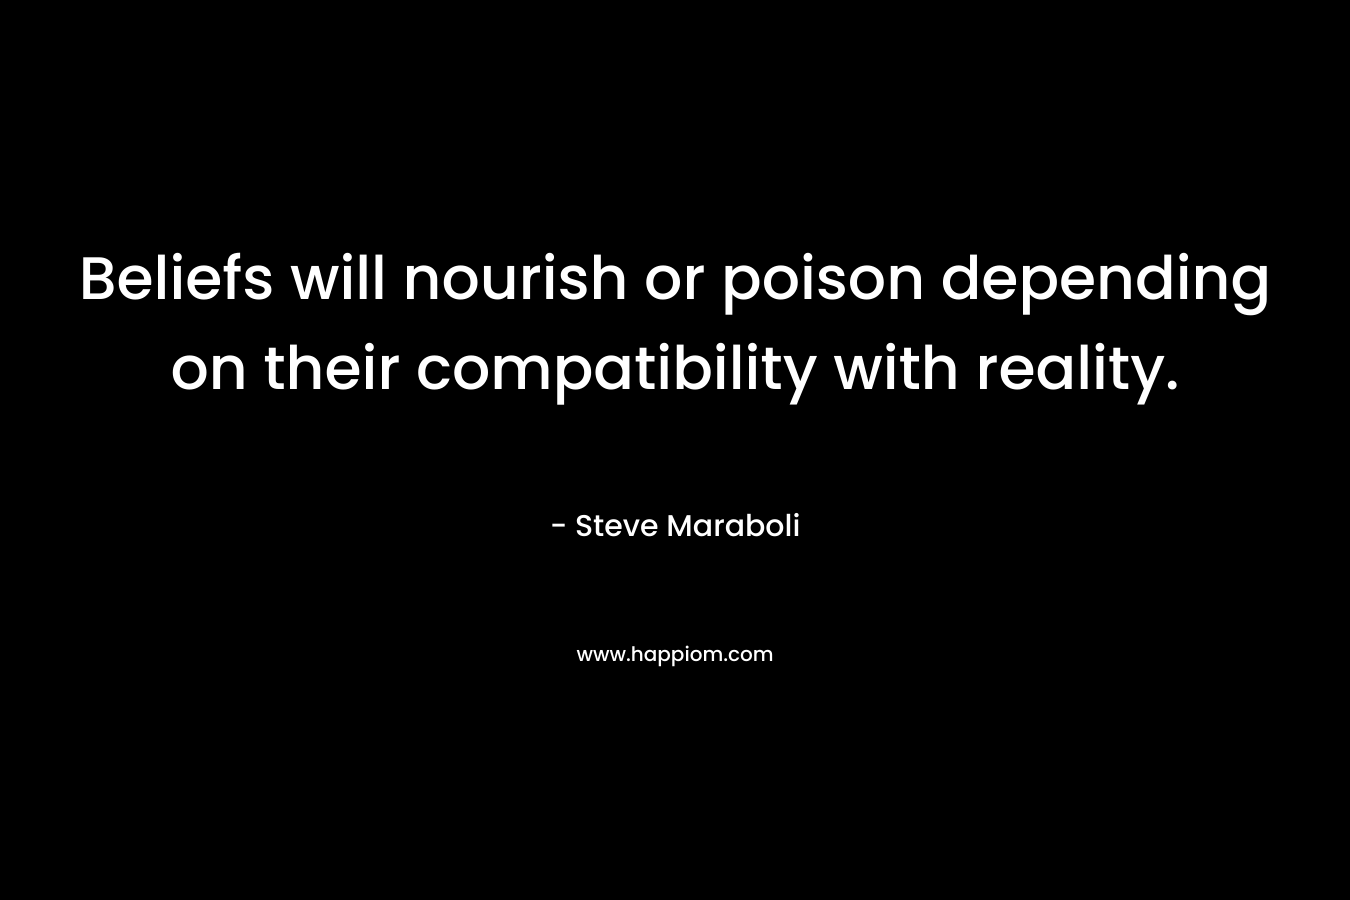 Beliefs will nourish or poison depending on their compatibility with reality. – Steve Maraboli